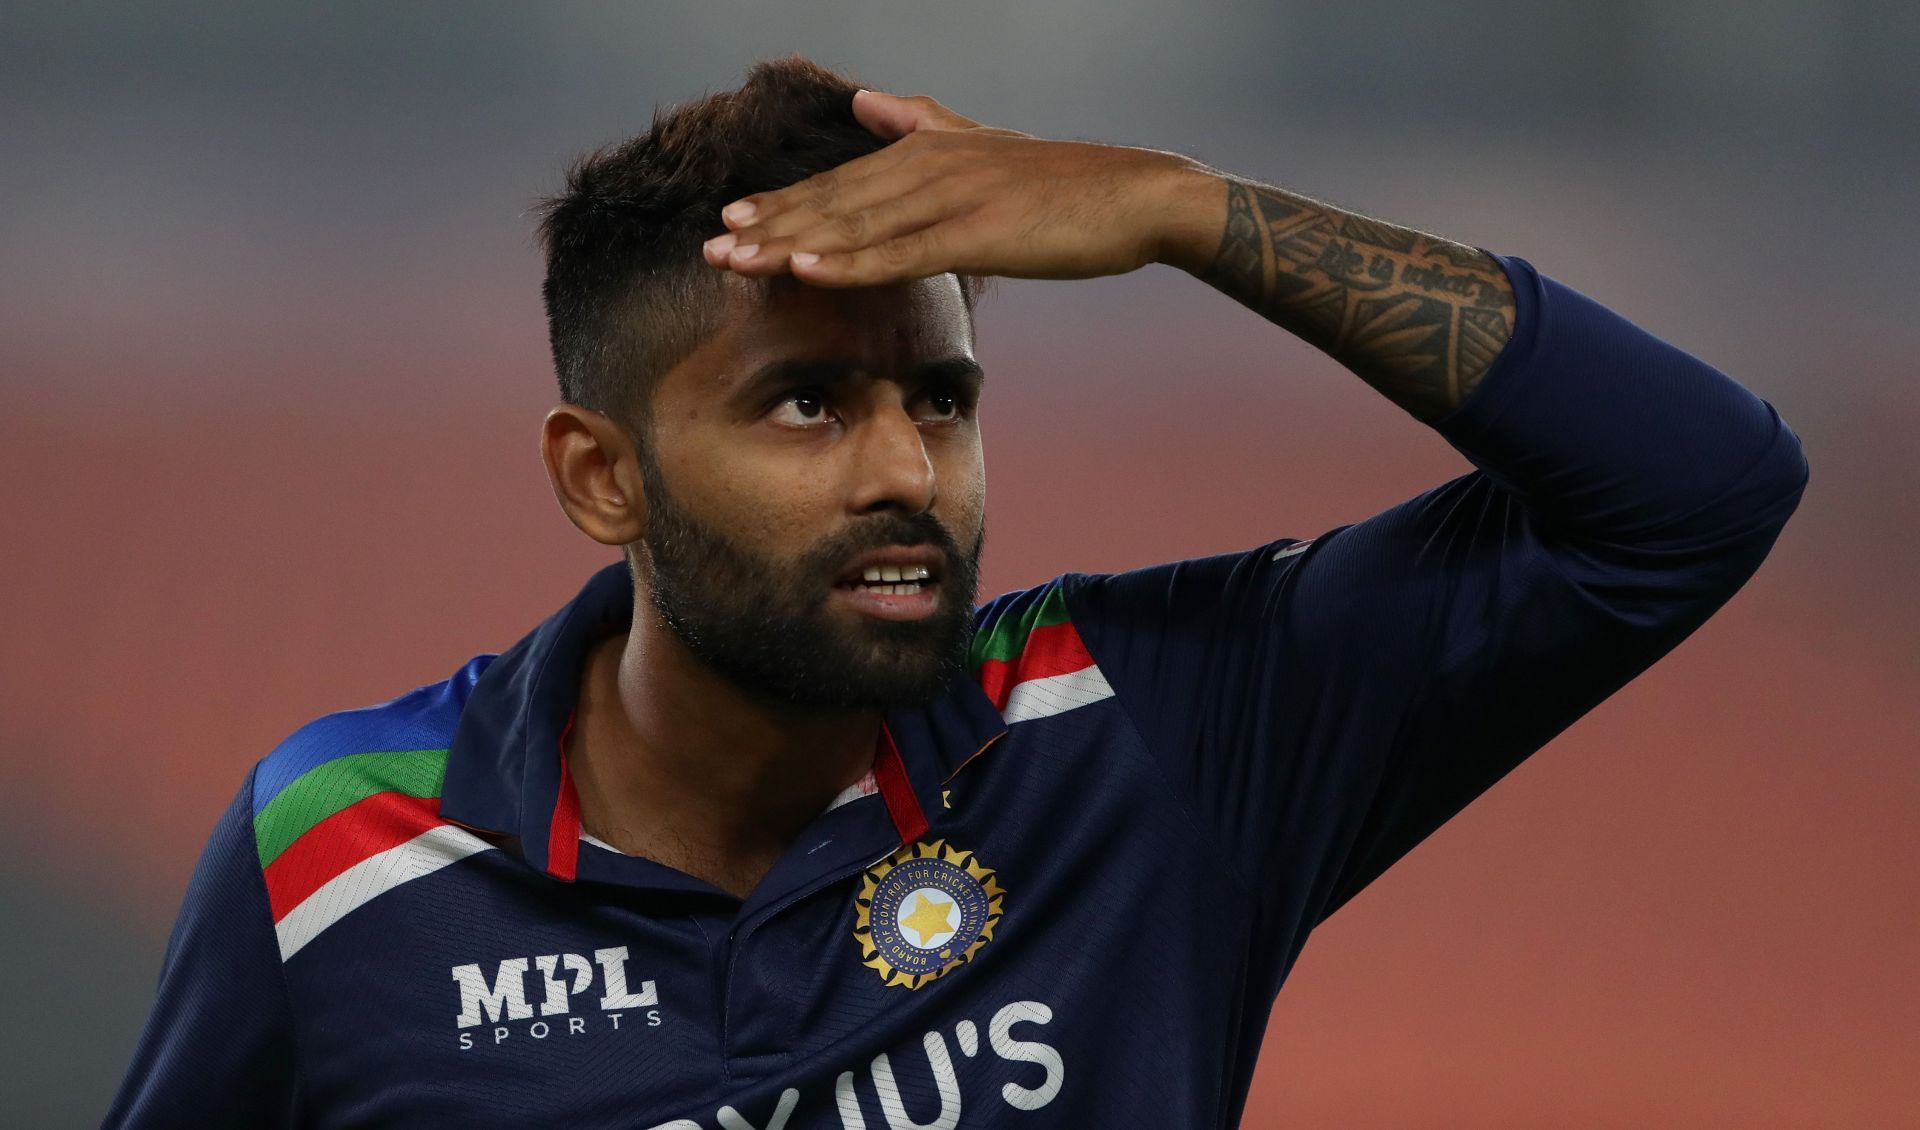 Suryakumar Yadav missed the match against NZ due to back spasms